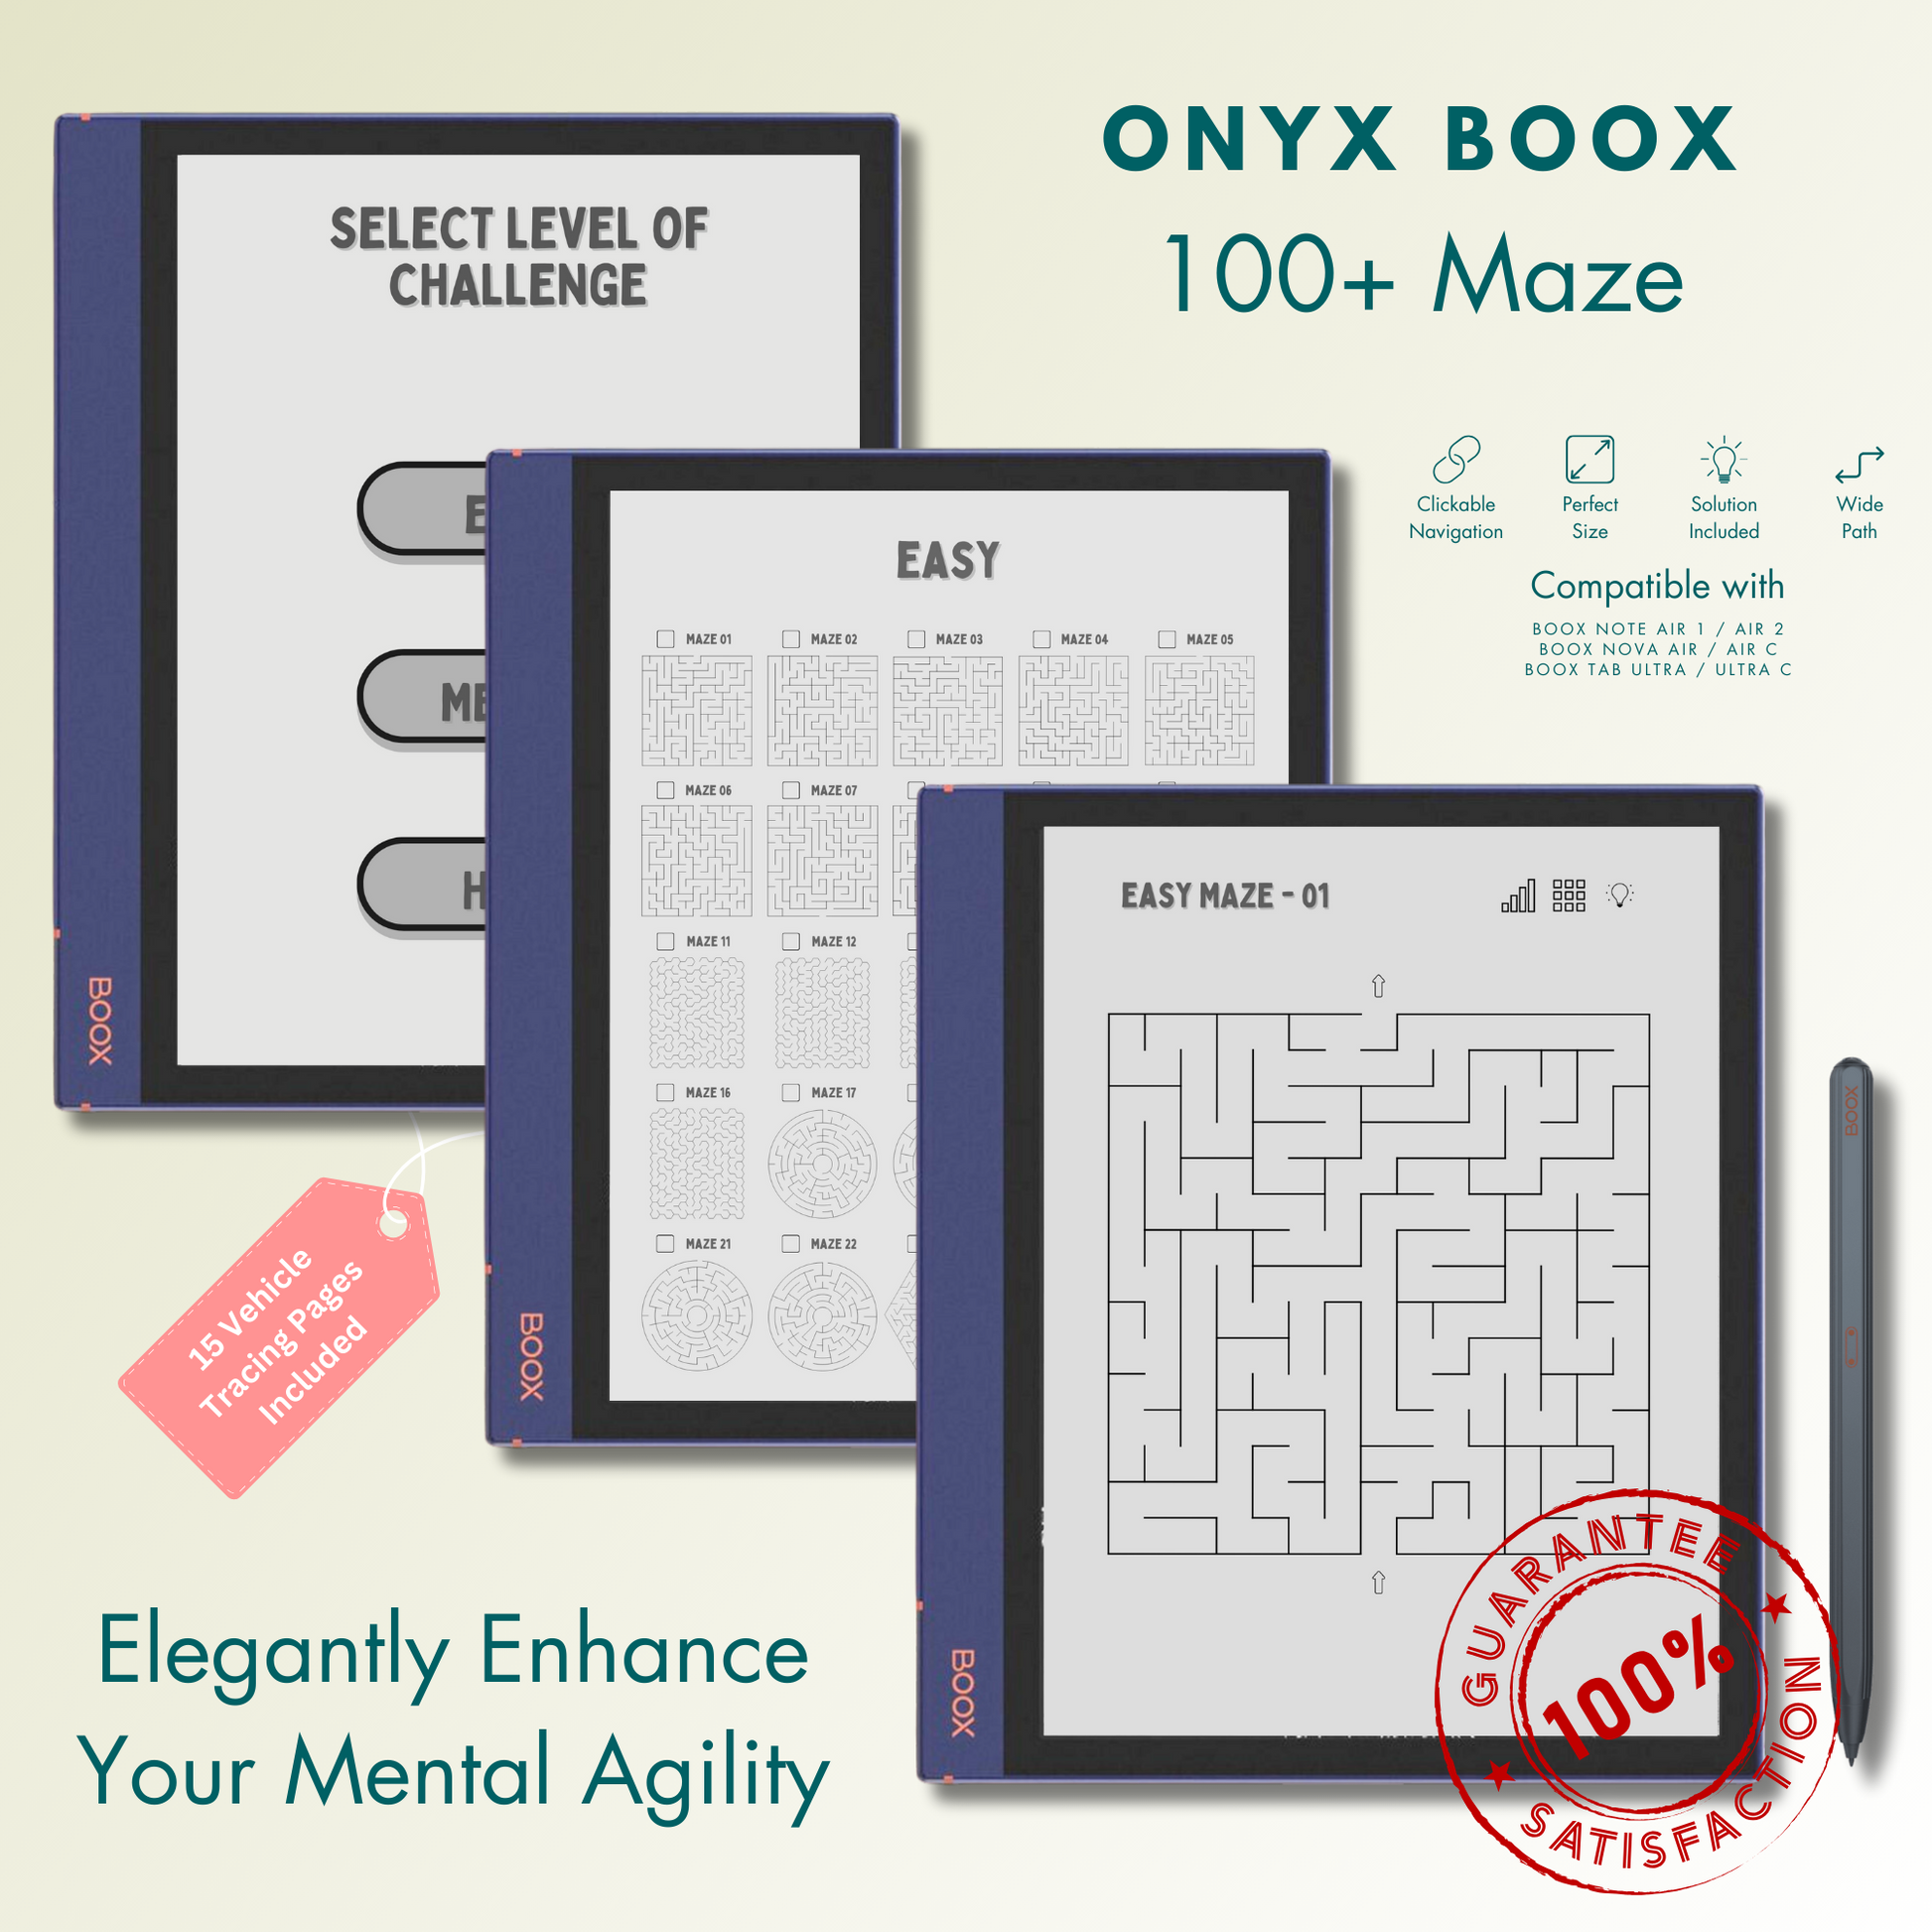 This is a Digital Download of 100+ Maze Puzzles in 3 different levels tailored for Onyx Boox. Compatible with Boox Note Air 1, Boox Note Air 2, Boox Note Air Plus, Boox Nova Air, Boox Nova Air C, Boox Tab Ultra and Boox Tab Ultra C.